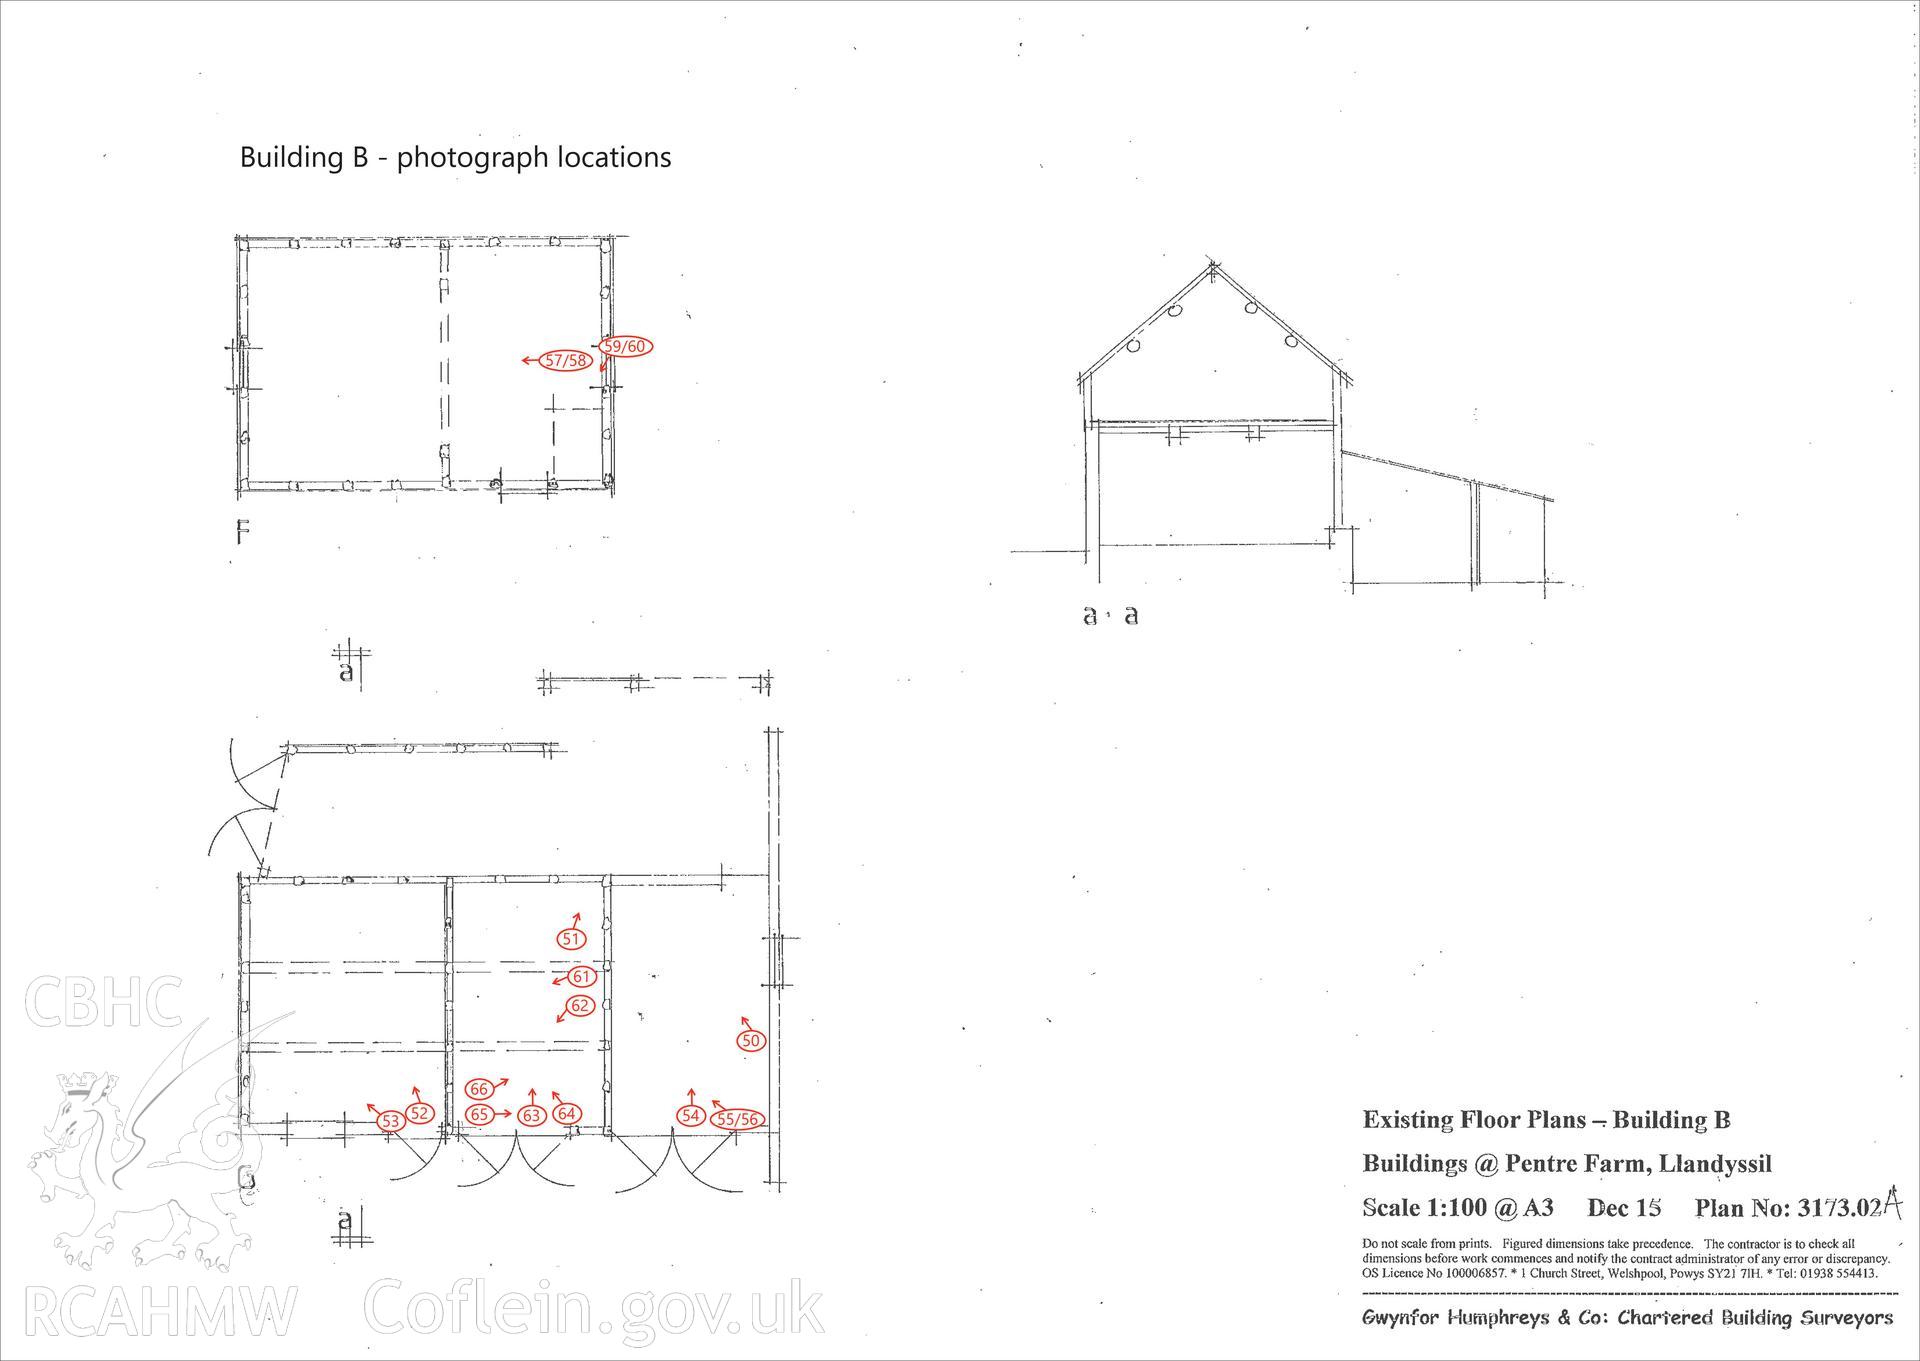 'Building B photo locations' used as report illustration for CPAT Project 2414: Pentre Barns, Llandyssil, Powys - Building Survey. Prepared by Kate Pack of Clwyd Powys Archaeological Trust, 2019. Report no. 1694.